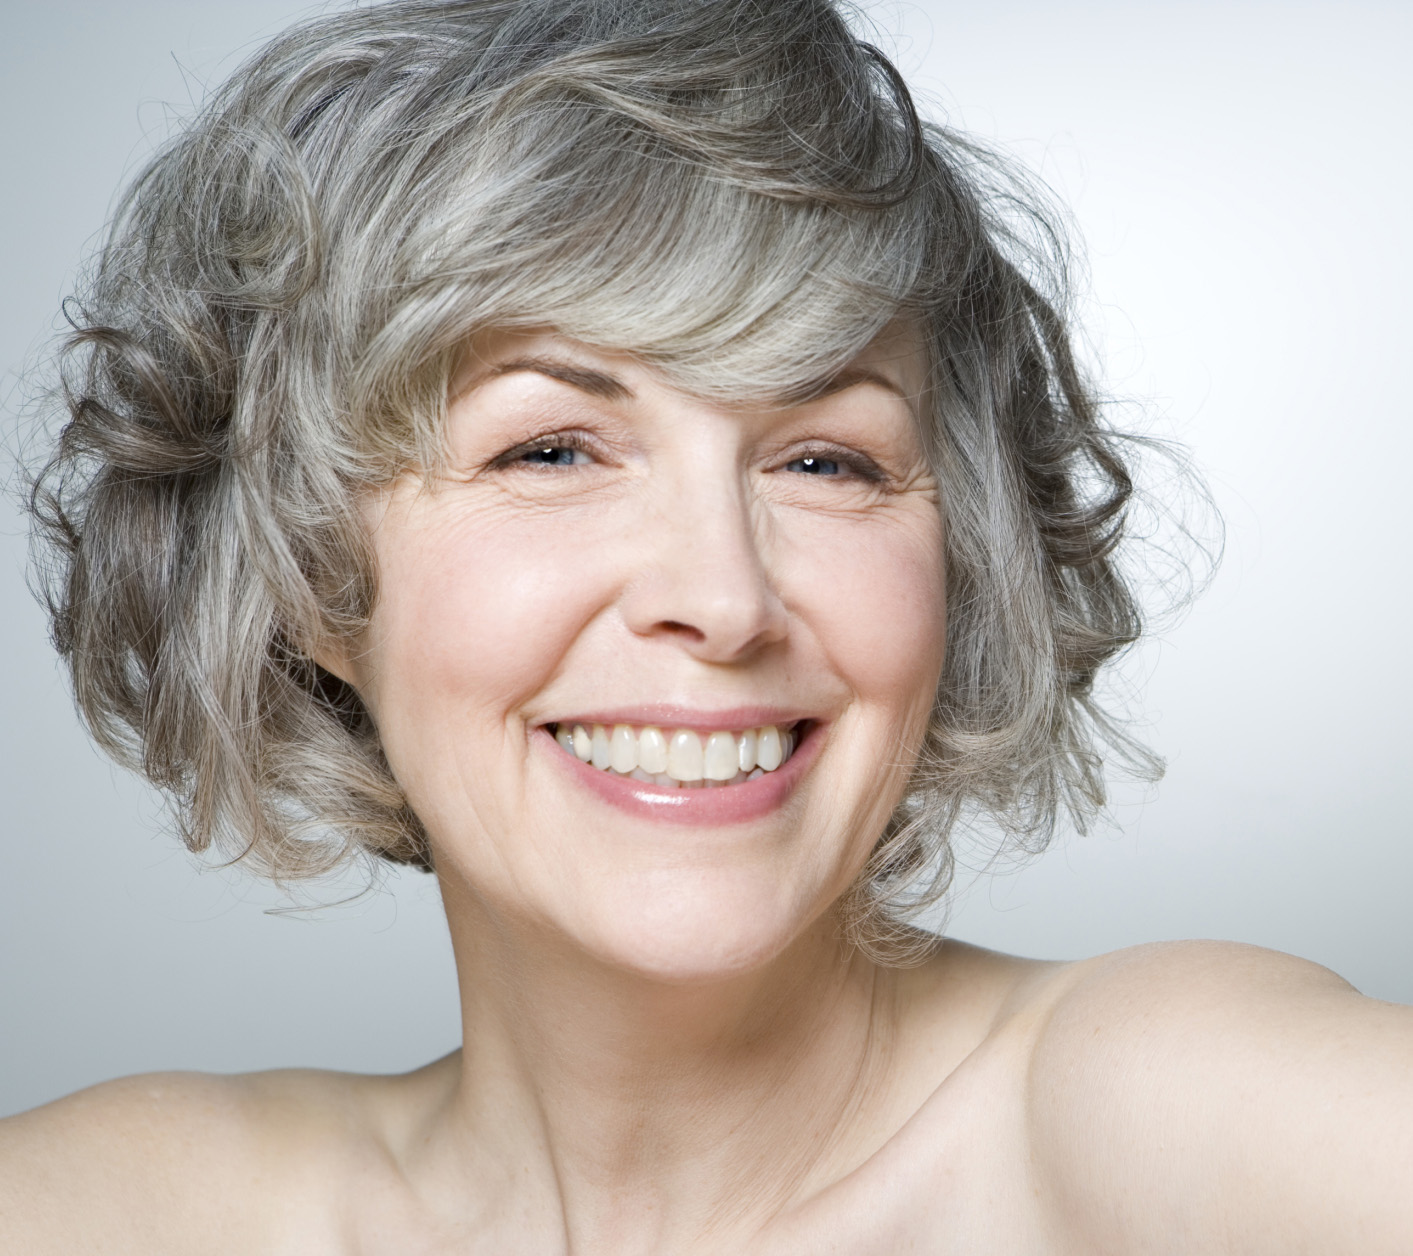 80 Short Hairstyles For Women Over 50 To Look Elegant